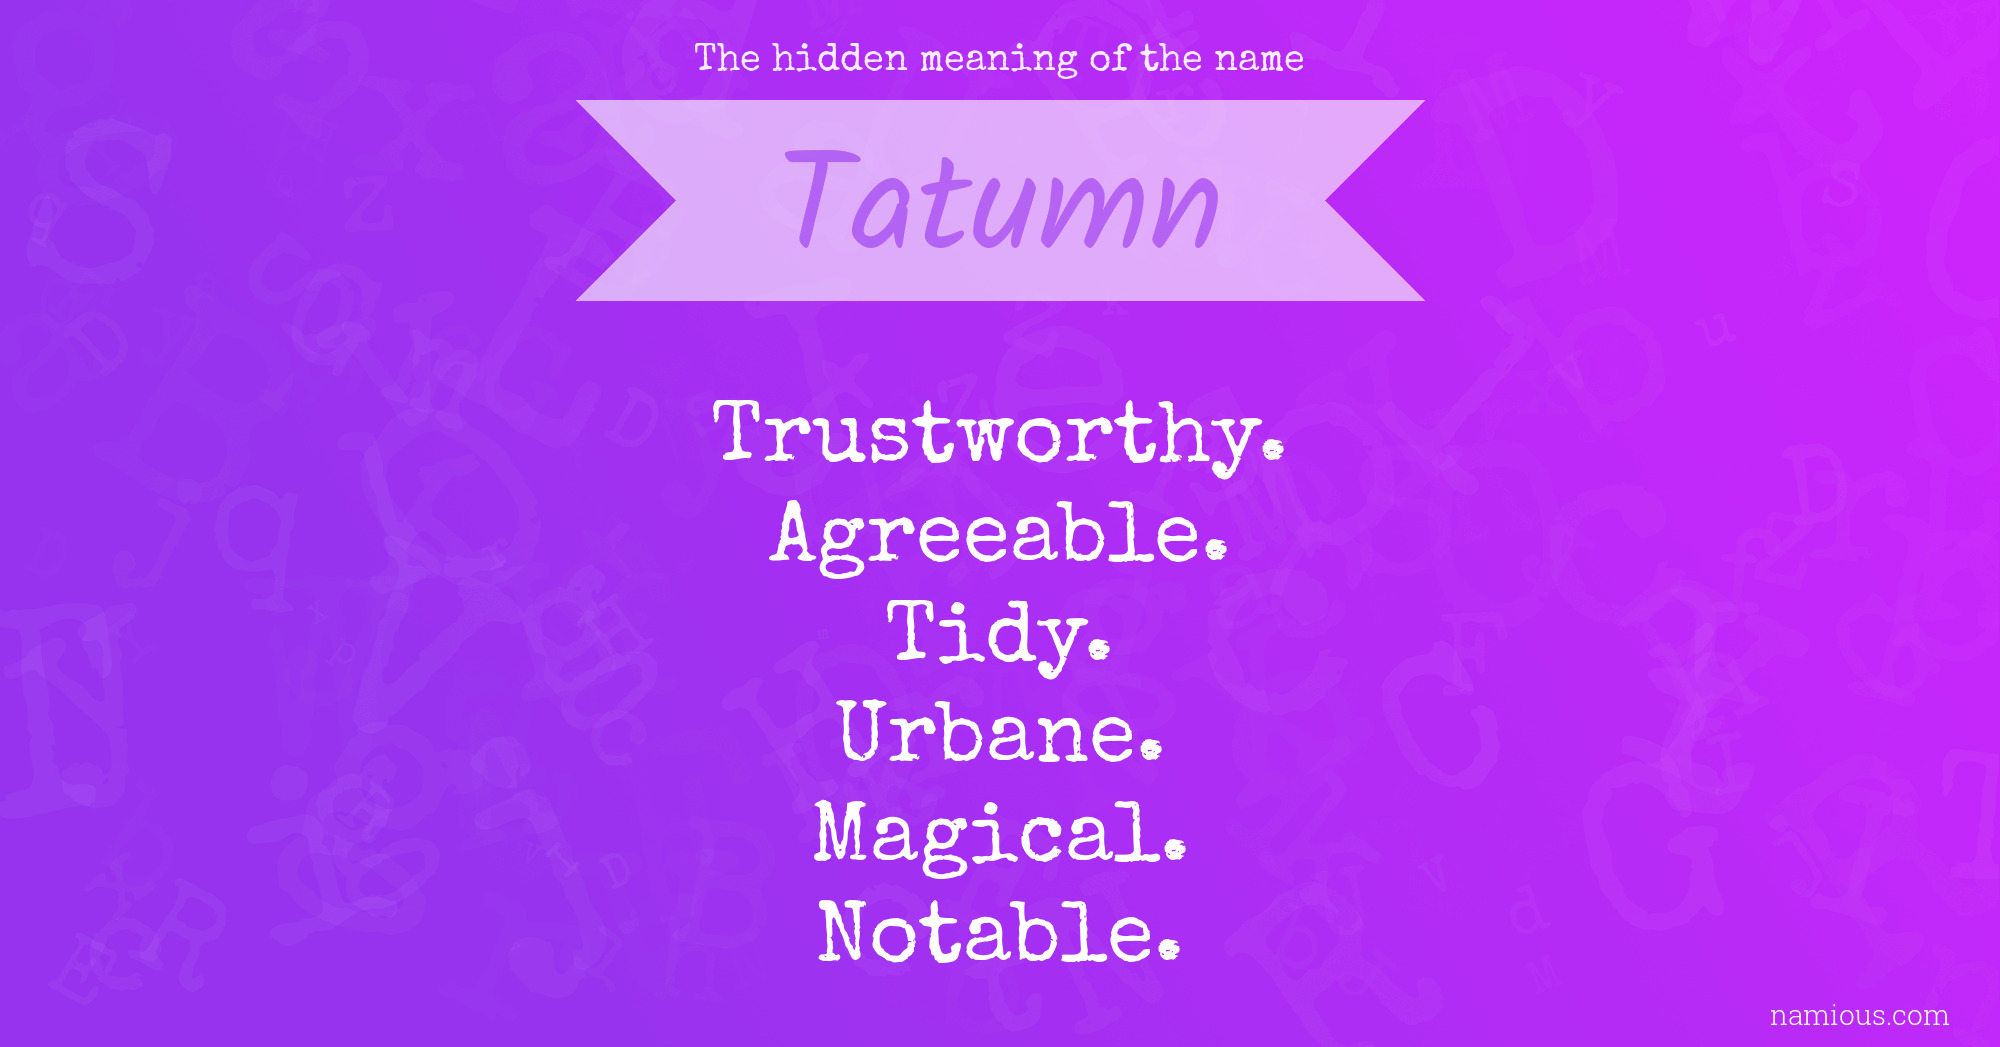 The hidden meaning of the name Tatumn